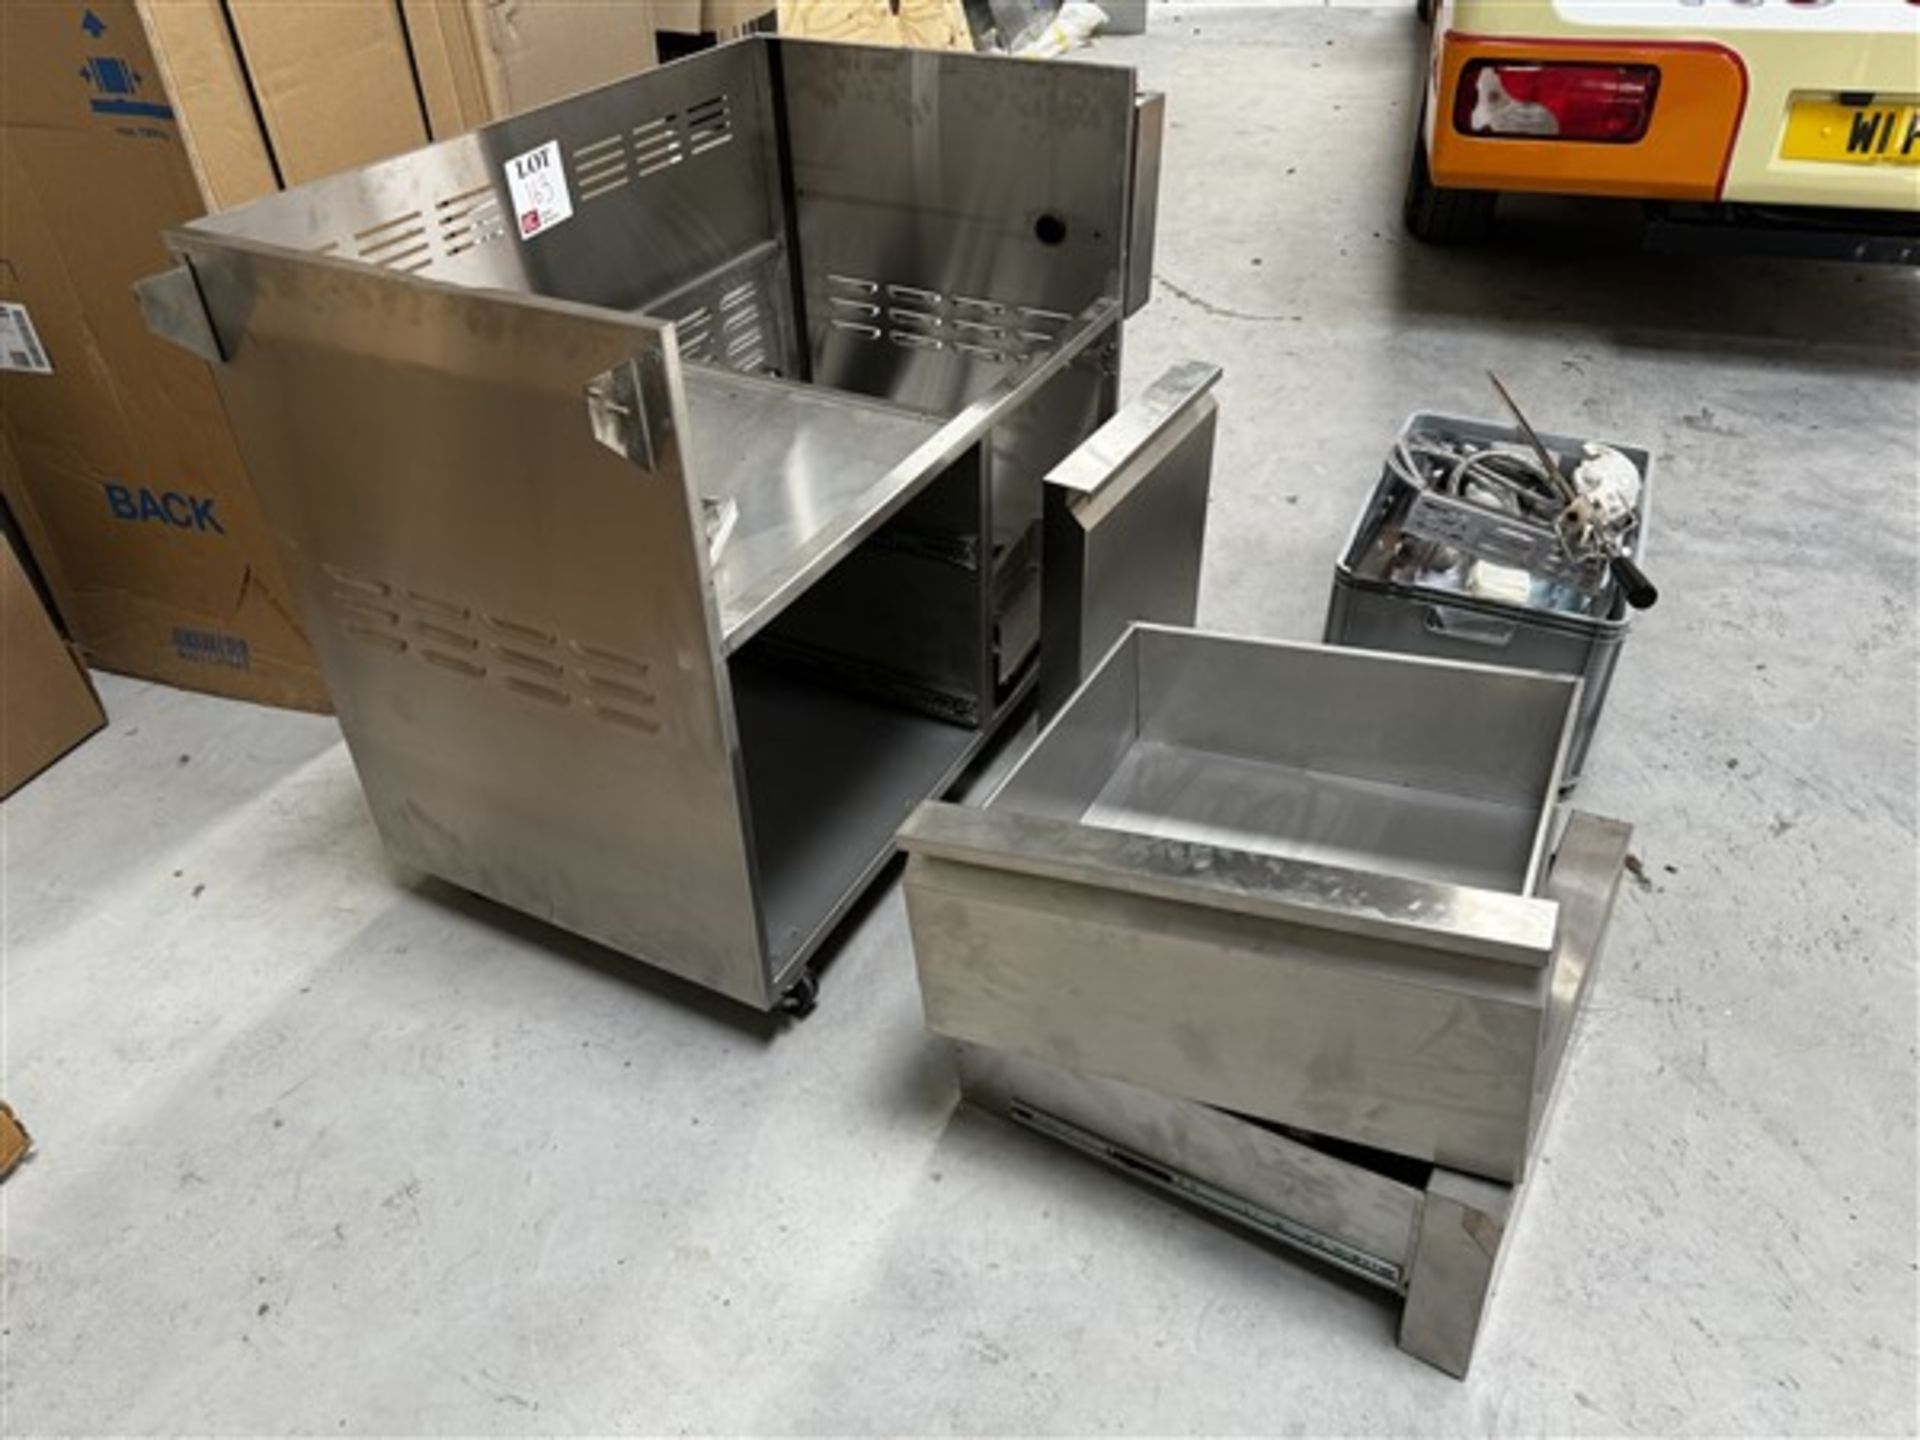 Stainless steel BBQ counter with two shelves/drawers counter dimensions: height 94cm x length 1.3m x - Image 2 of 4